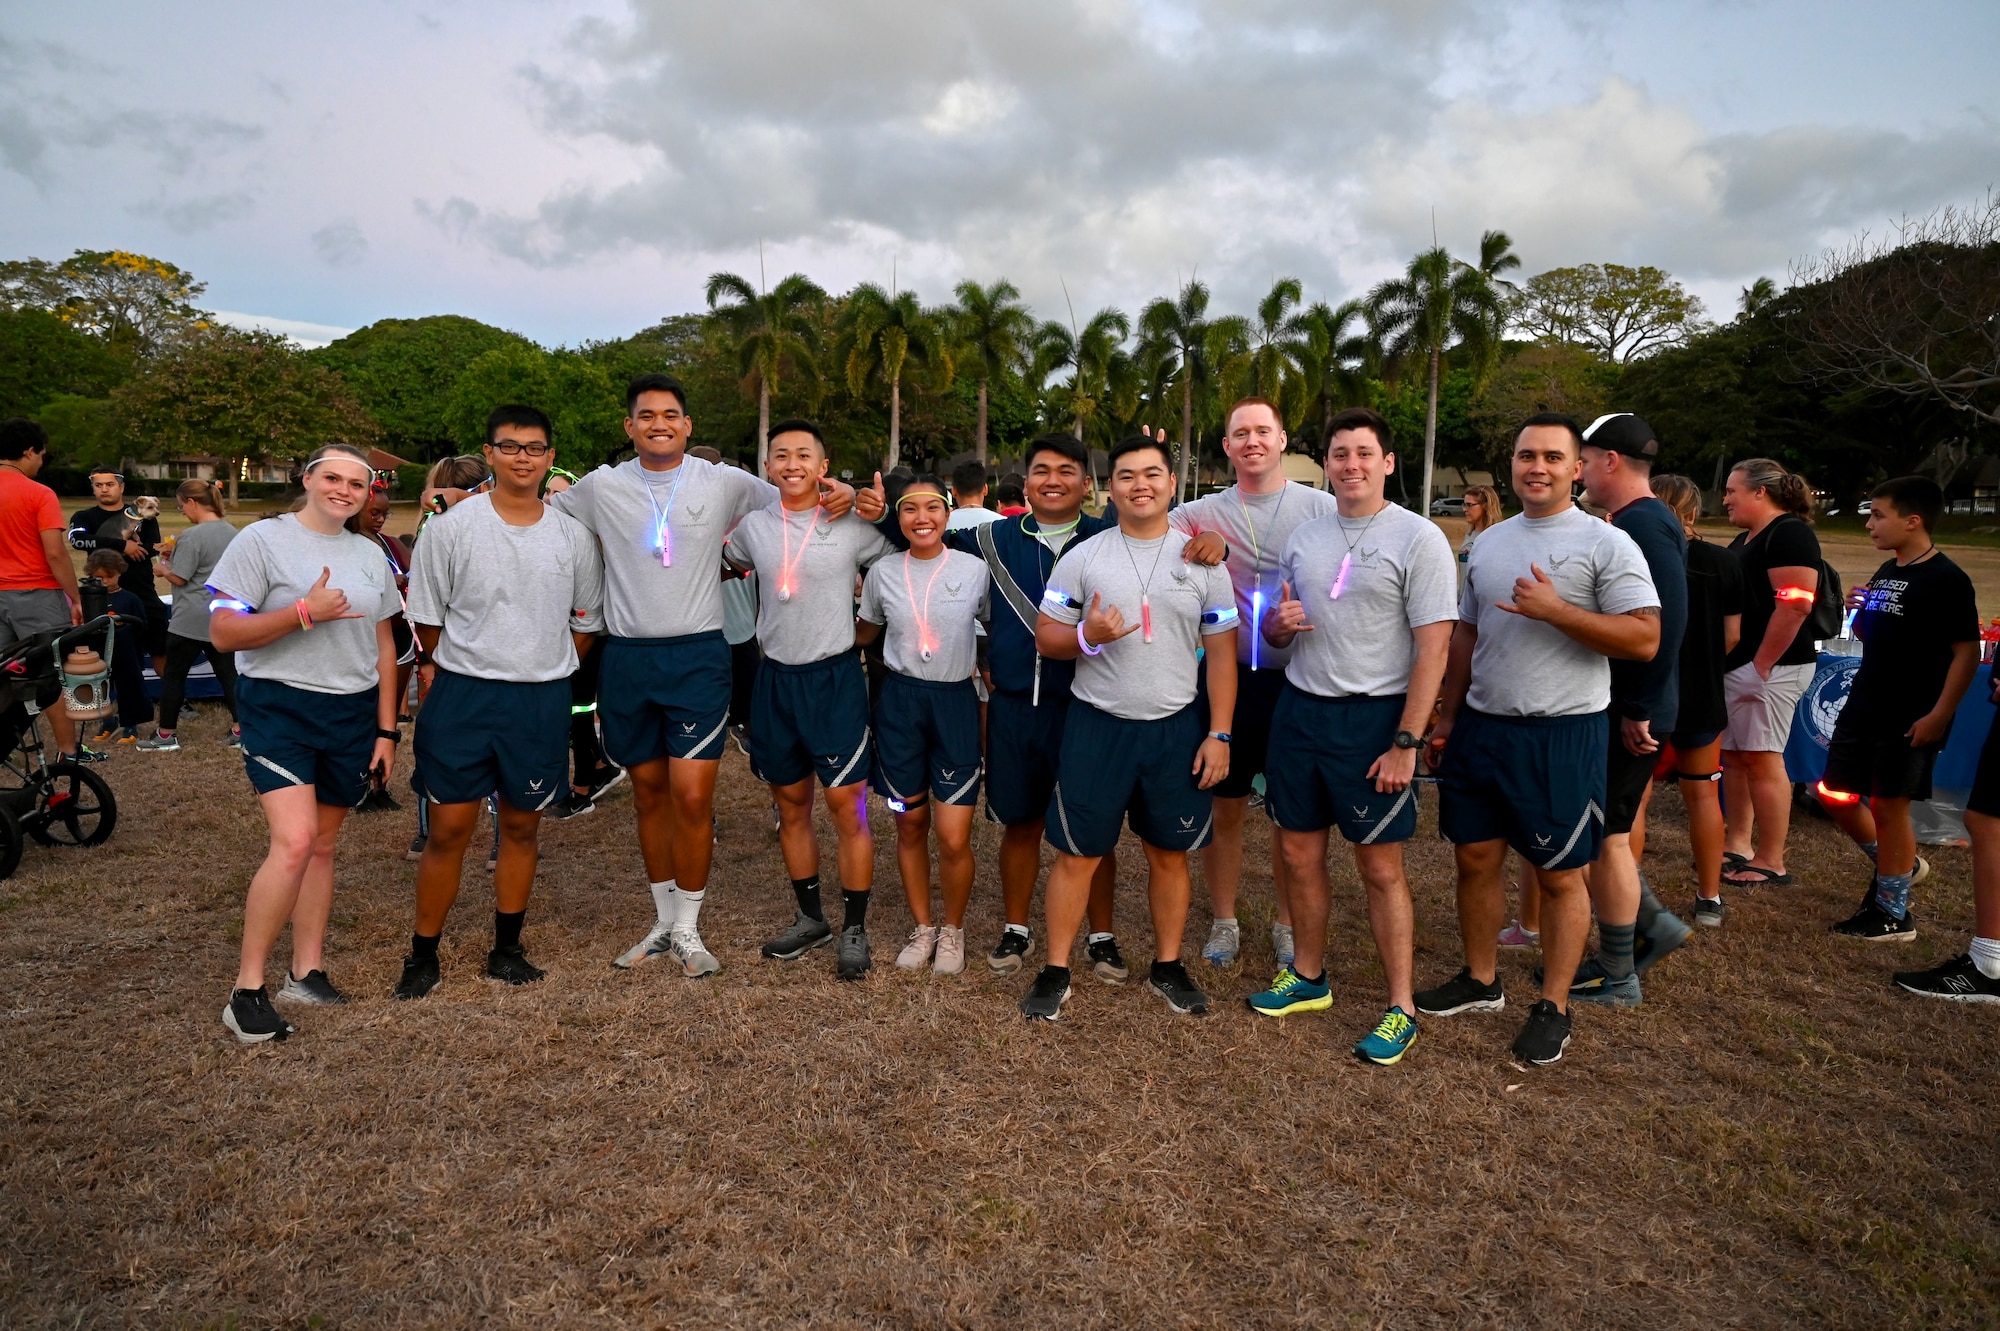 Members from the University of Hawaii at Manoa Air Force Reserve Officer Training Corps program attend the Sexual Assault Awareness and Prevention Month glow run at Joint Base Pearl Harbor-Hickam, Hawaii, April 1, 2022. Cadets and cadre members participated in the 5k run around the Hickam-side of JBPHH to help raise awareness for sexual assault and resources for victims in the military. (U.S. Air Force photo by 1st Lt. Benjamin Aronson)